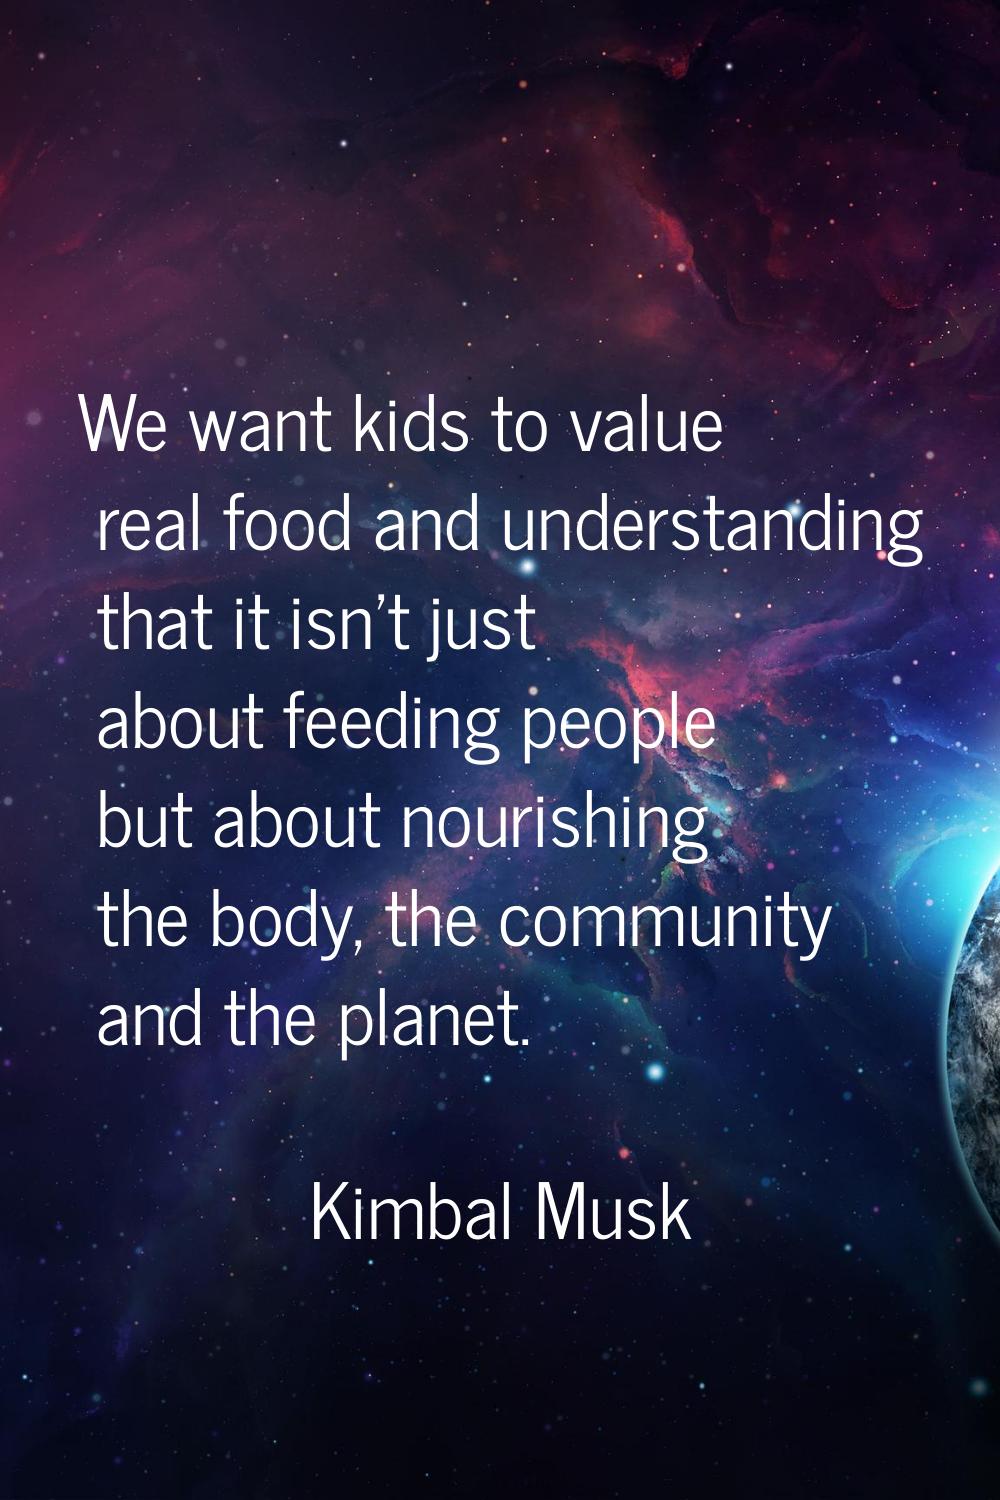 We want kids to value real food and understanding that it isn't just about feeding people but about